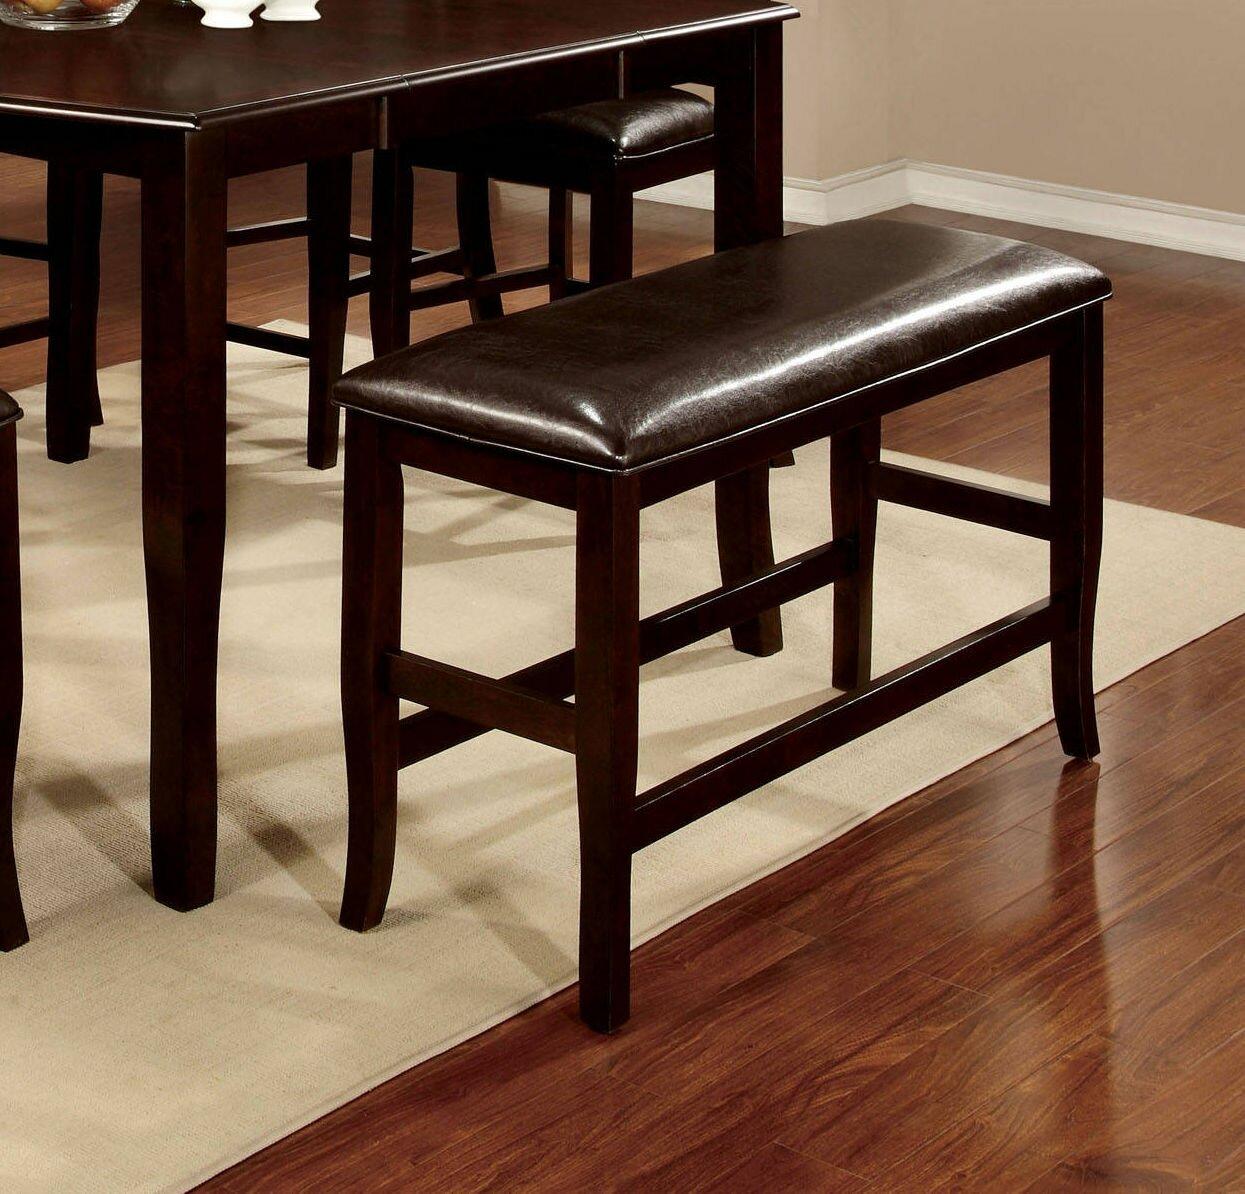 

    
Transitional Dark Cherry & Espresso Solid Wood Counter Dining Set 6pcs Furniture of America Woodside
